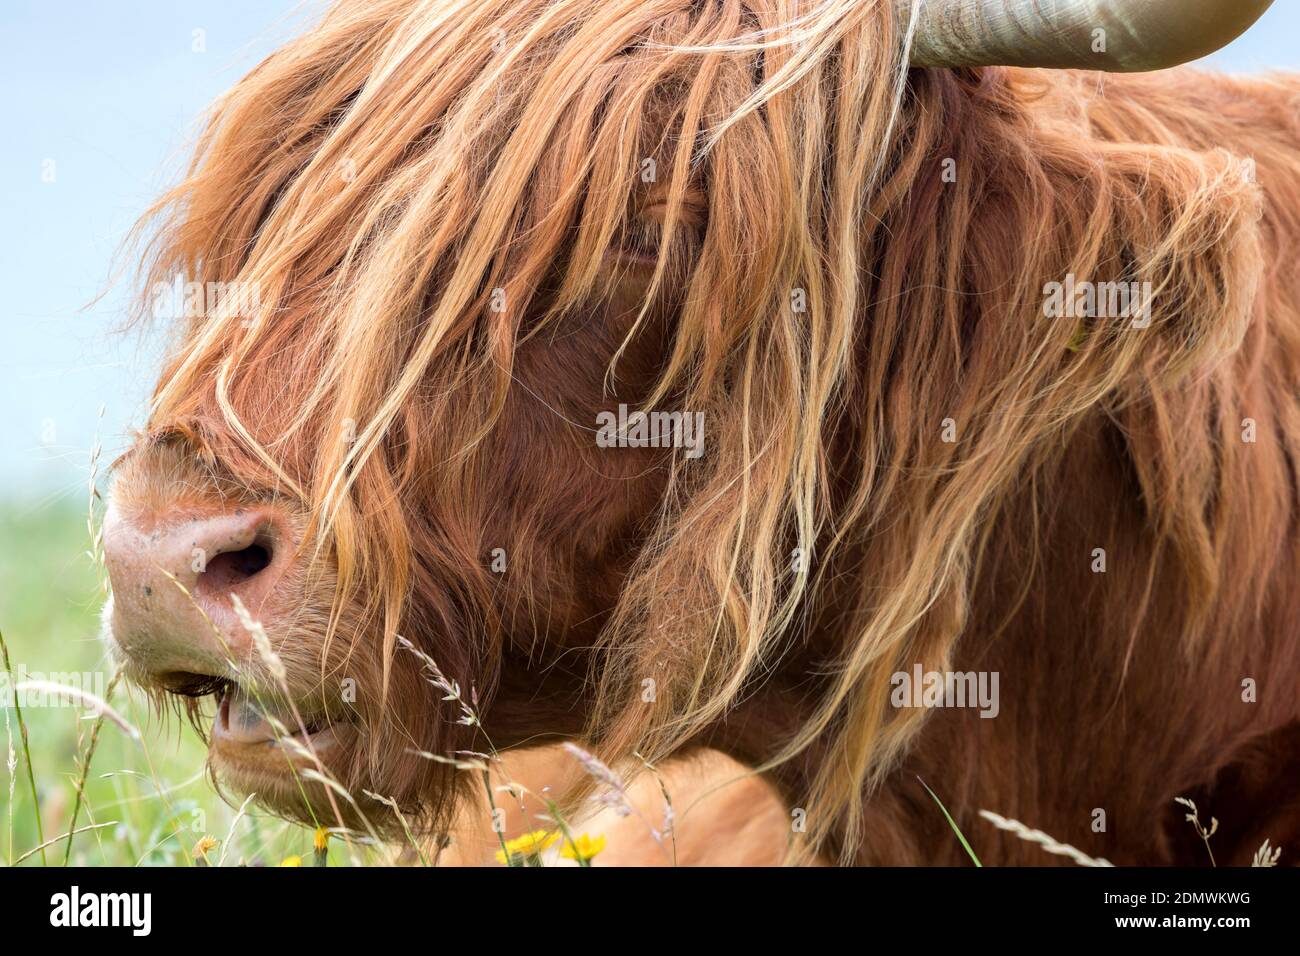 Highland Cow grazing on lush grass, Isle of Harris, Outer Hebrides, Scotland Stock Photo